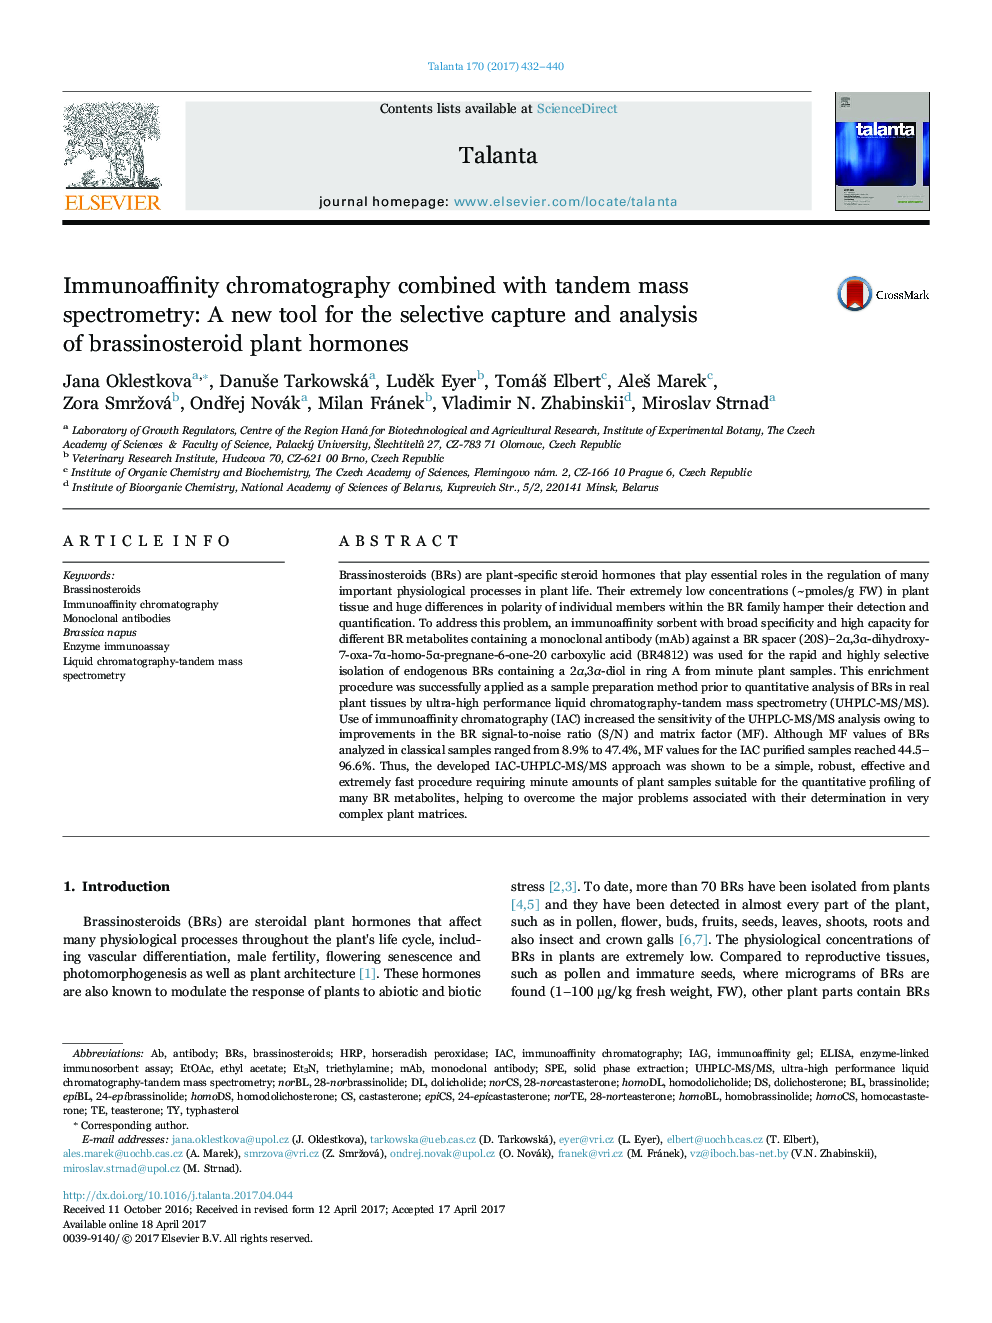 Immunoaffinity chromatography combined with tandem mass spectrometry: A new tool for the selective capture and analysis of brassinosteroid plant hormones